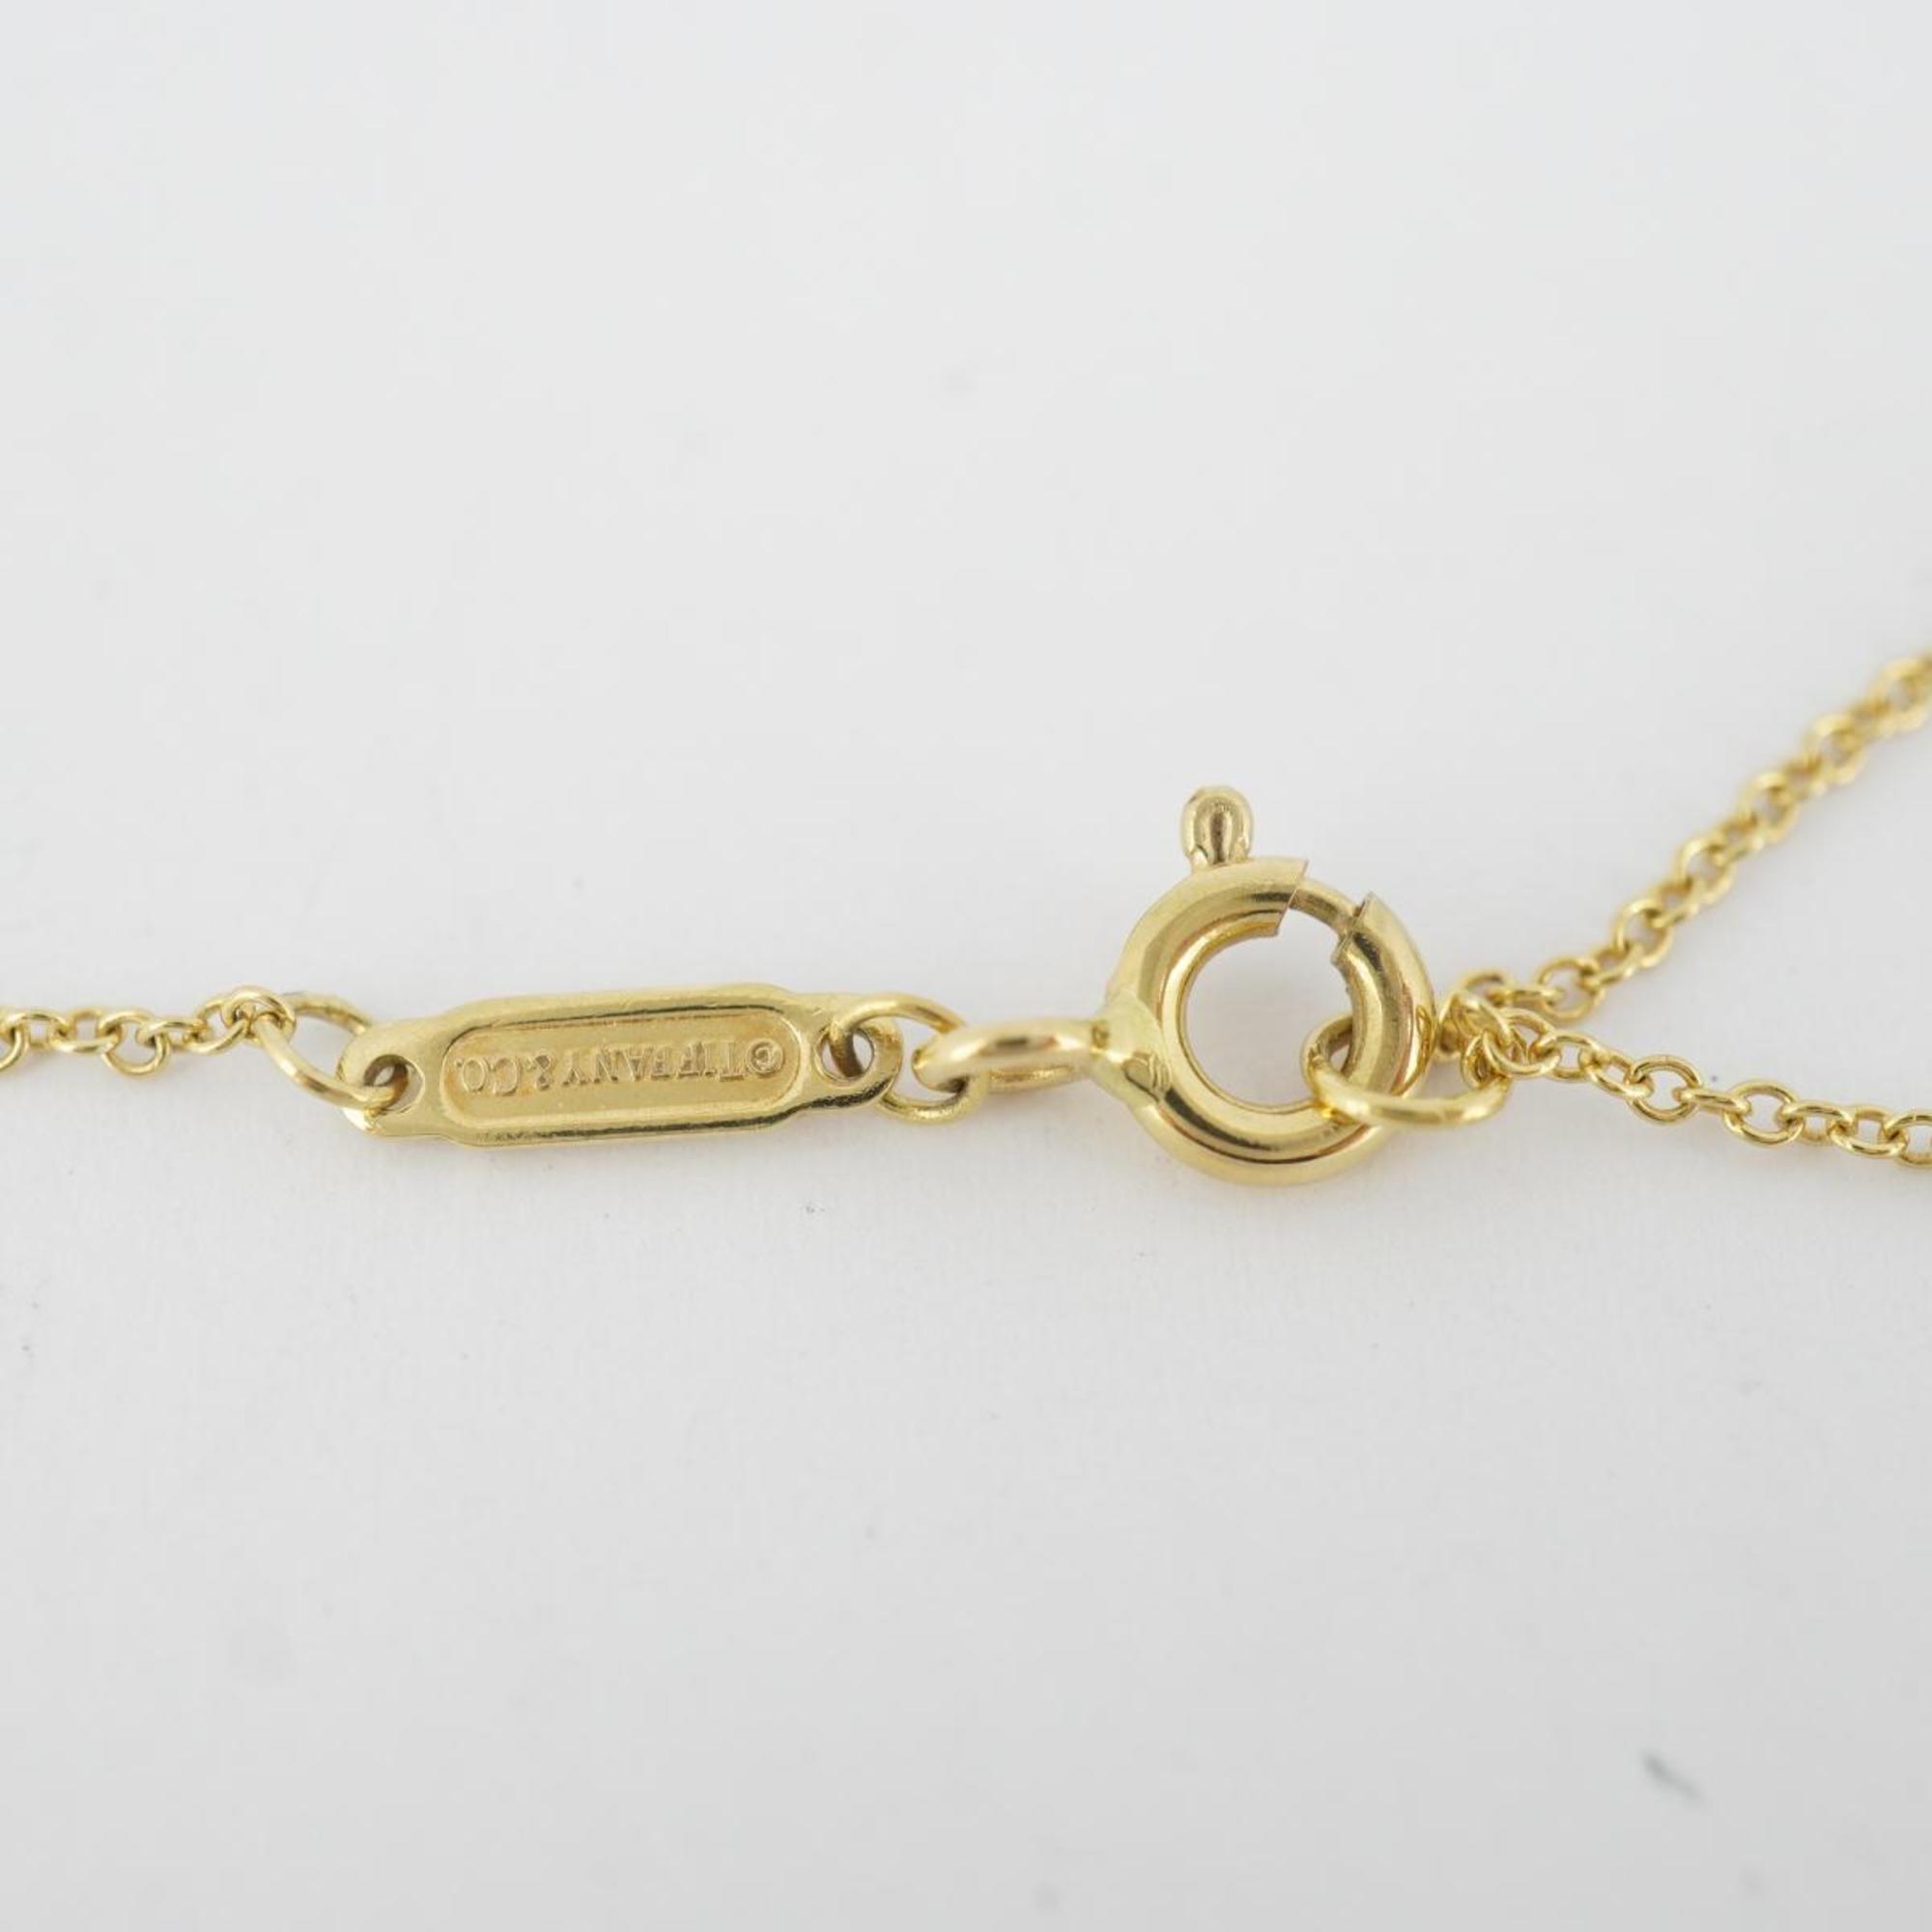 Tiffany Necklace T Smile K18YG Yellow Gold Ladies